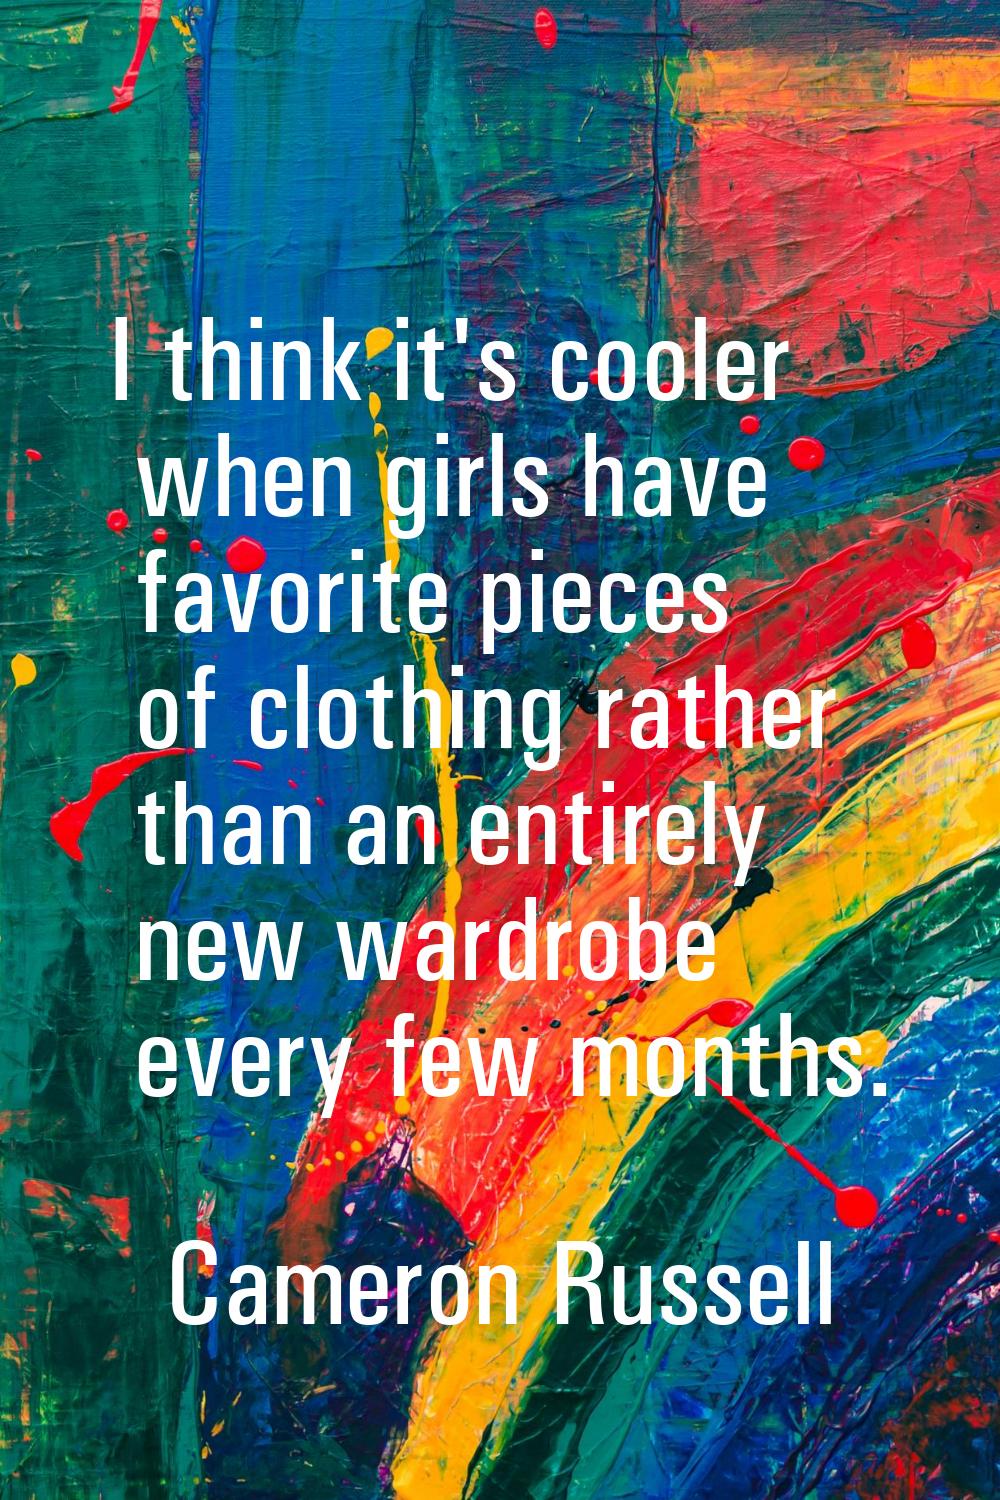 I think it's cooler when girls have favorite pieces of clothing rather than an entirely new wardrob